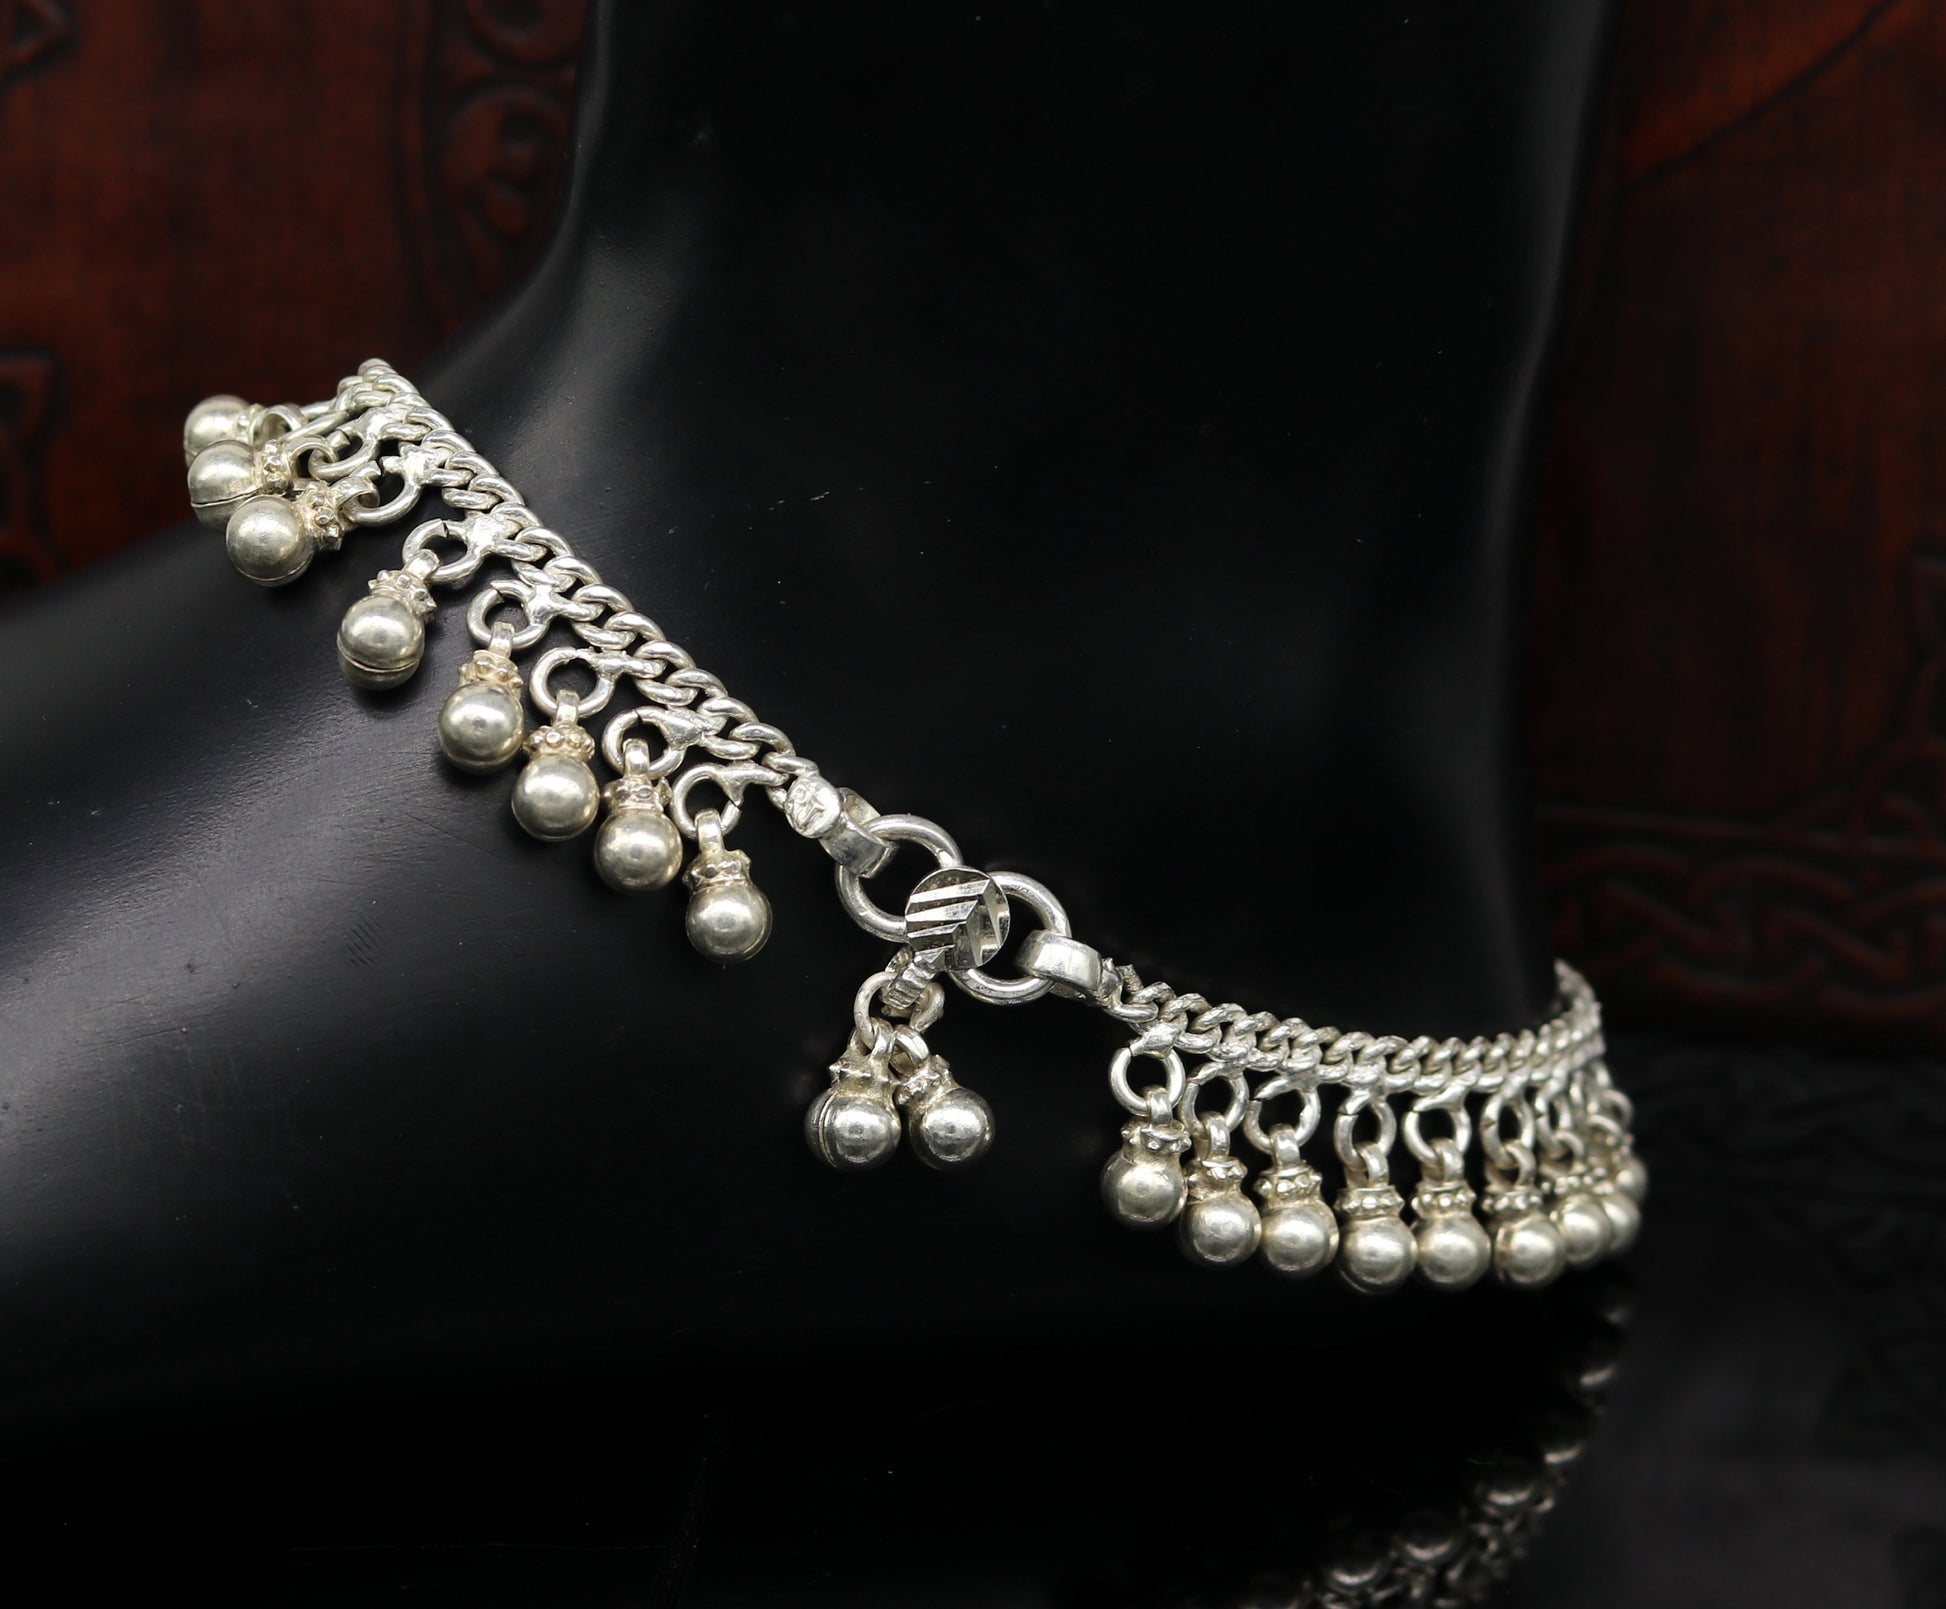 Solid sterling silver handmade vintage style heavy noisy bells single anklet ,amazing tribal ankle jewelry belly dance jewelry nank271 - TRIBAL ORNAMENTS